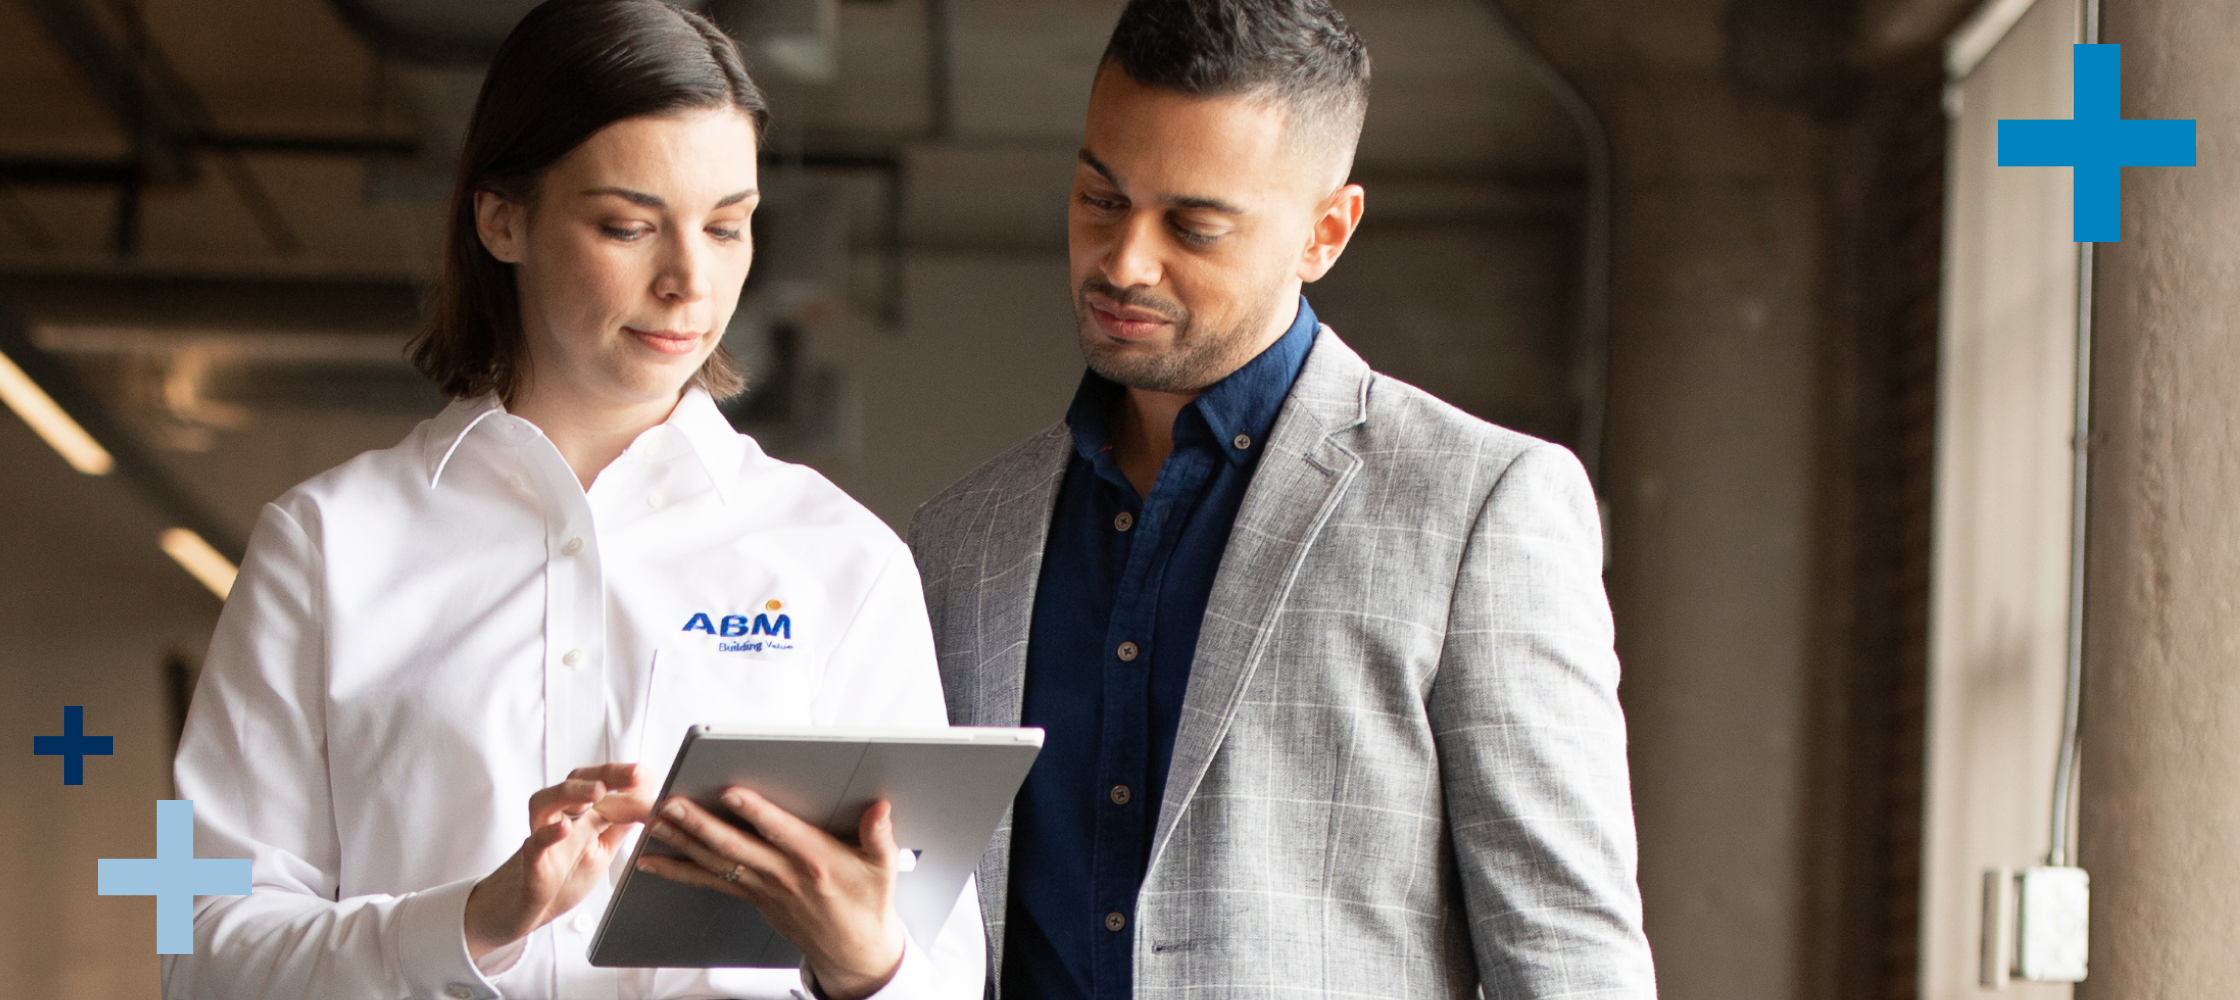 Woman in an ABM shirt sharing information on a tablet with a man in a suit jacket.